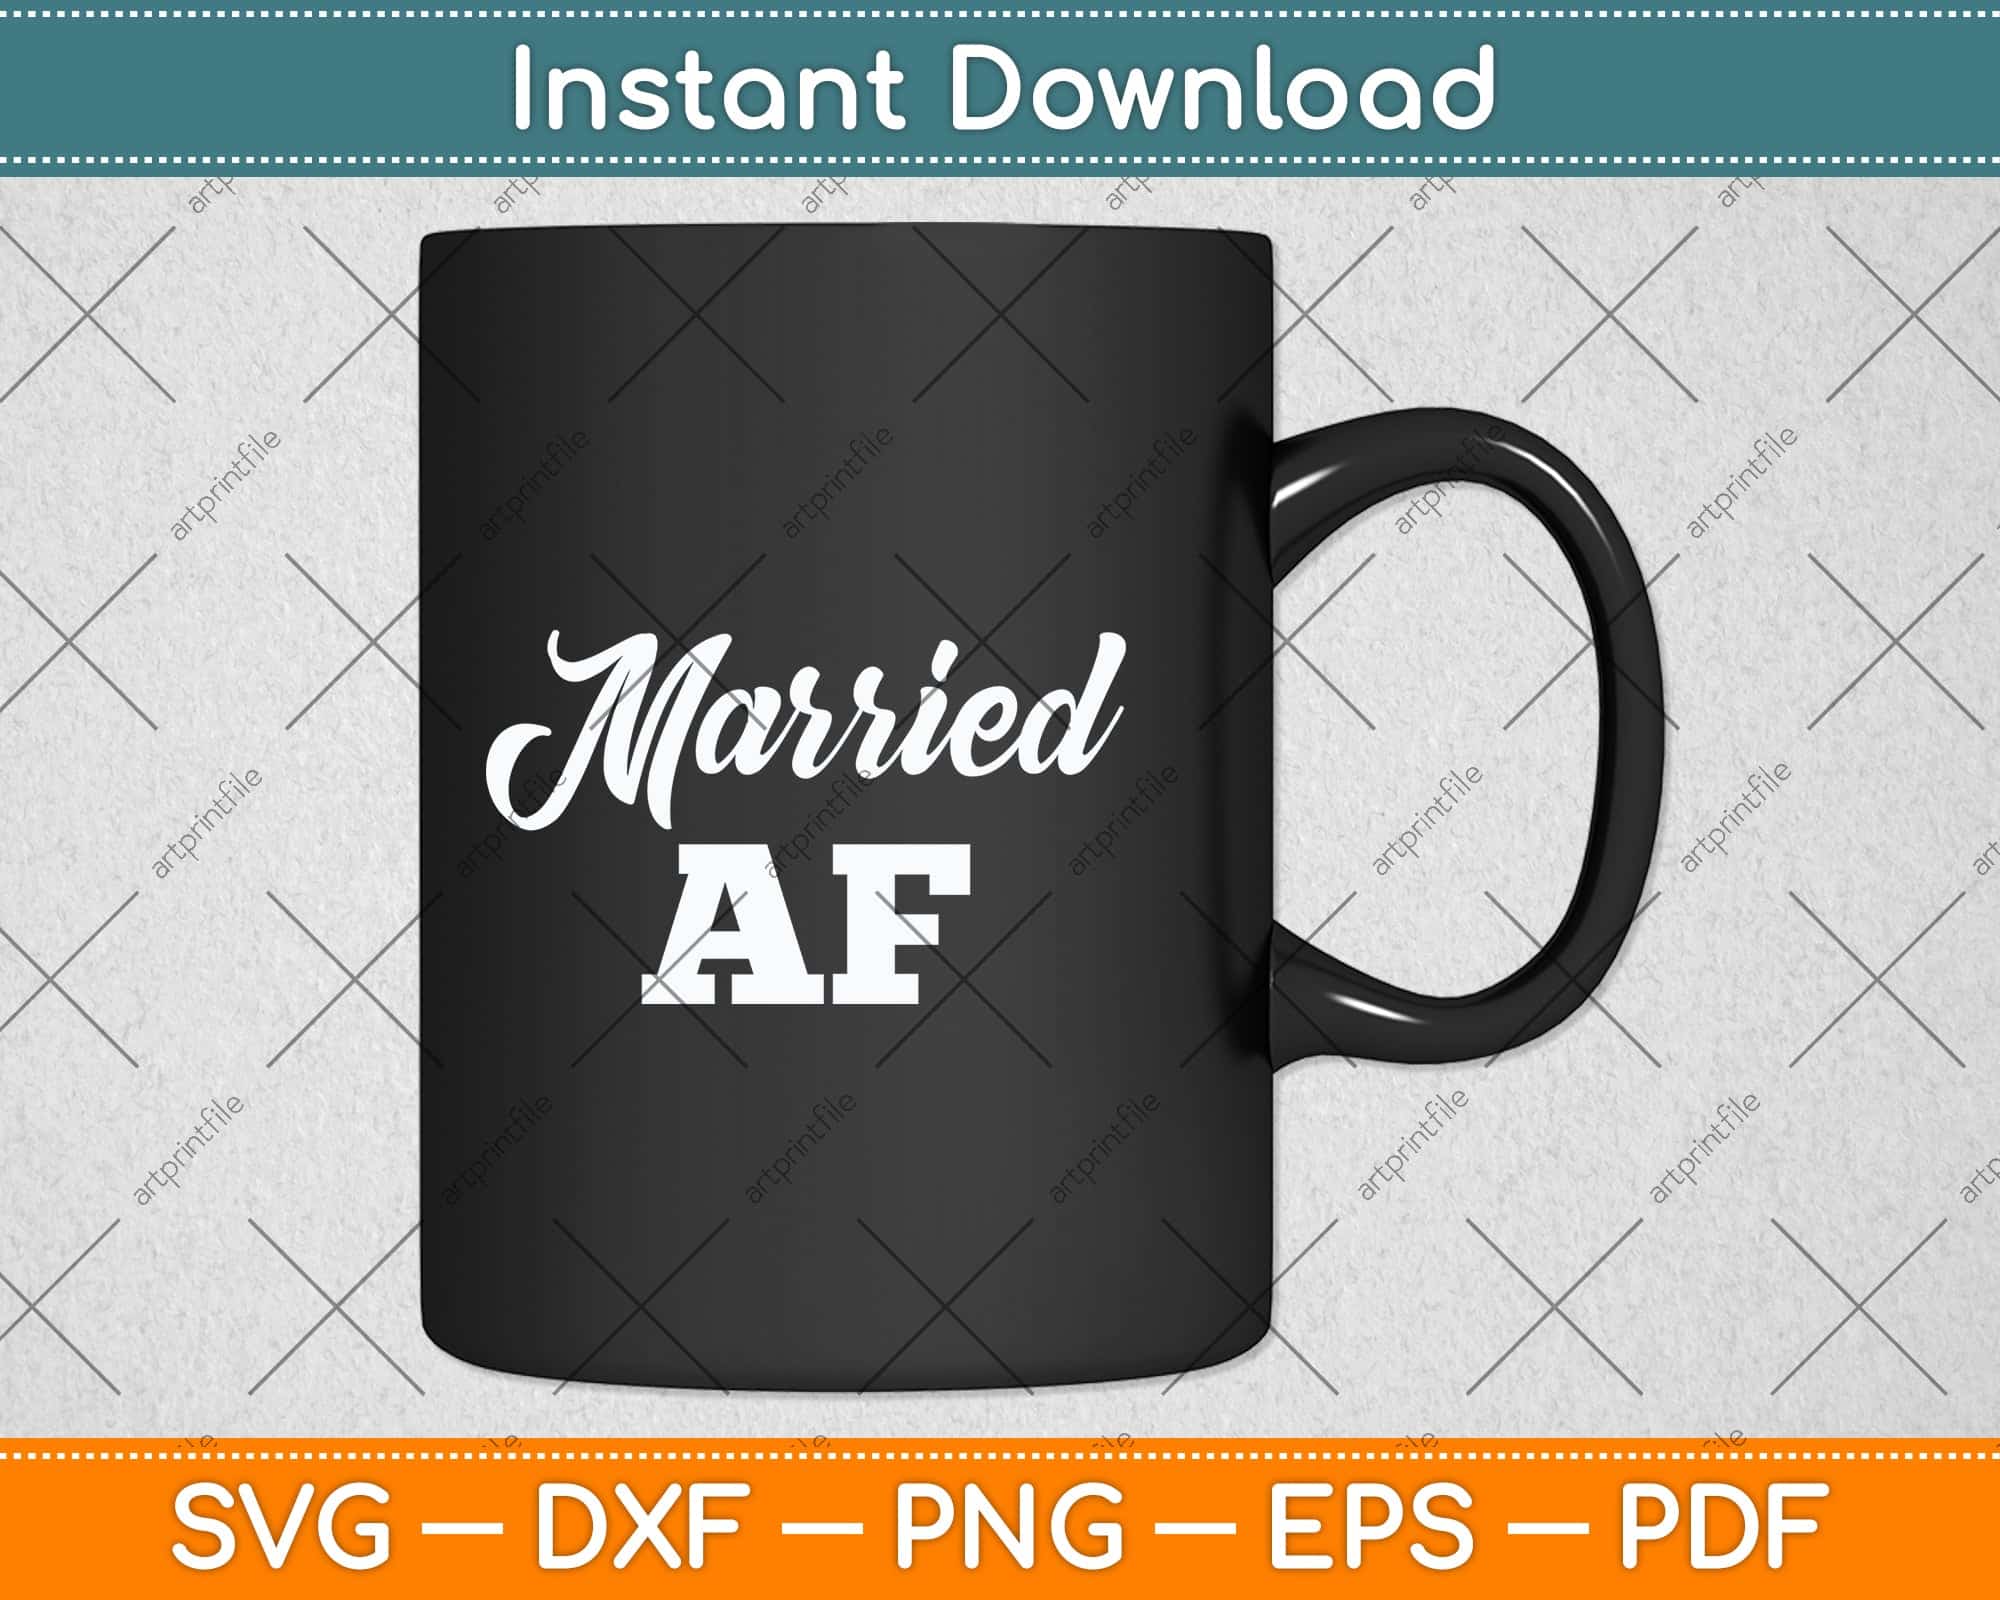 Just Married AT Wedding Bride Groom Funny Svg Cutting File